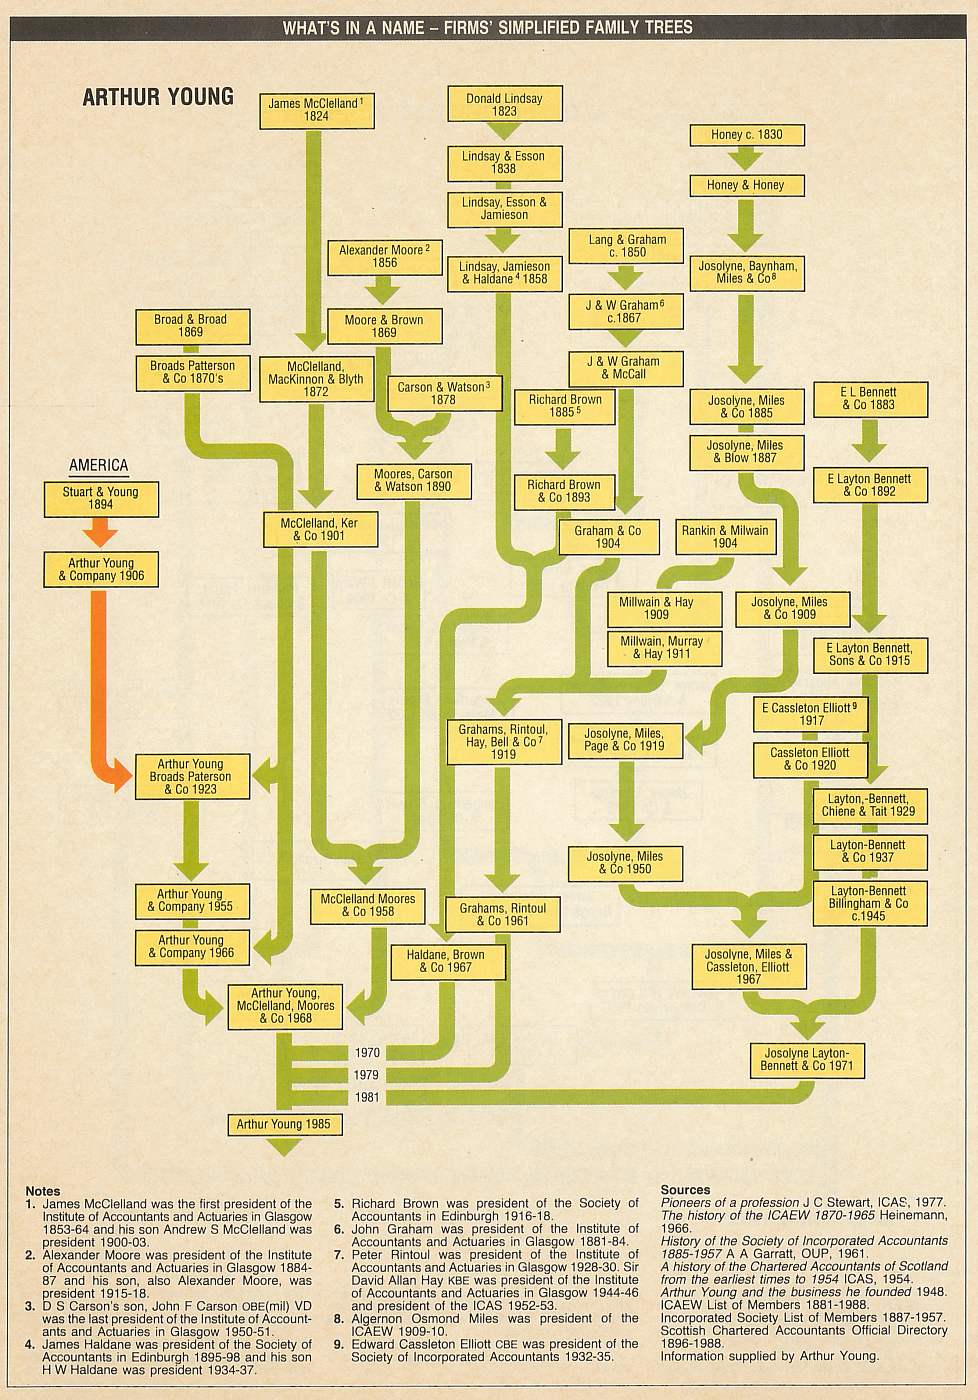 Image of the Arthur Young family tree